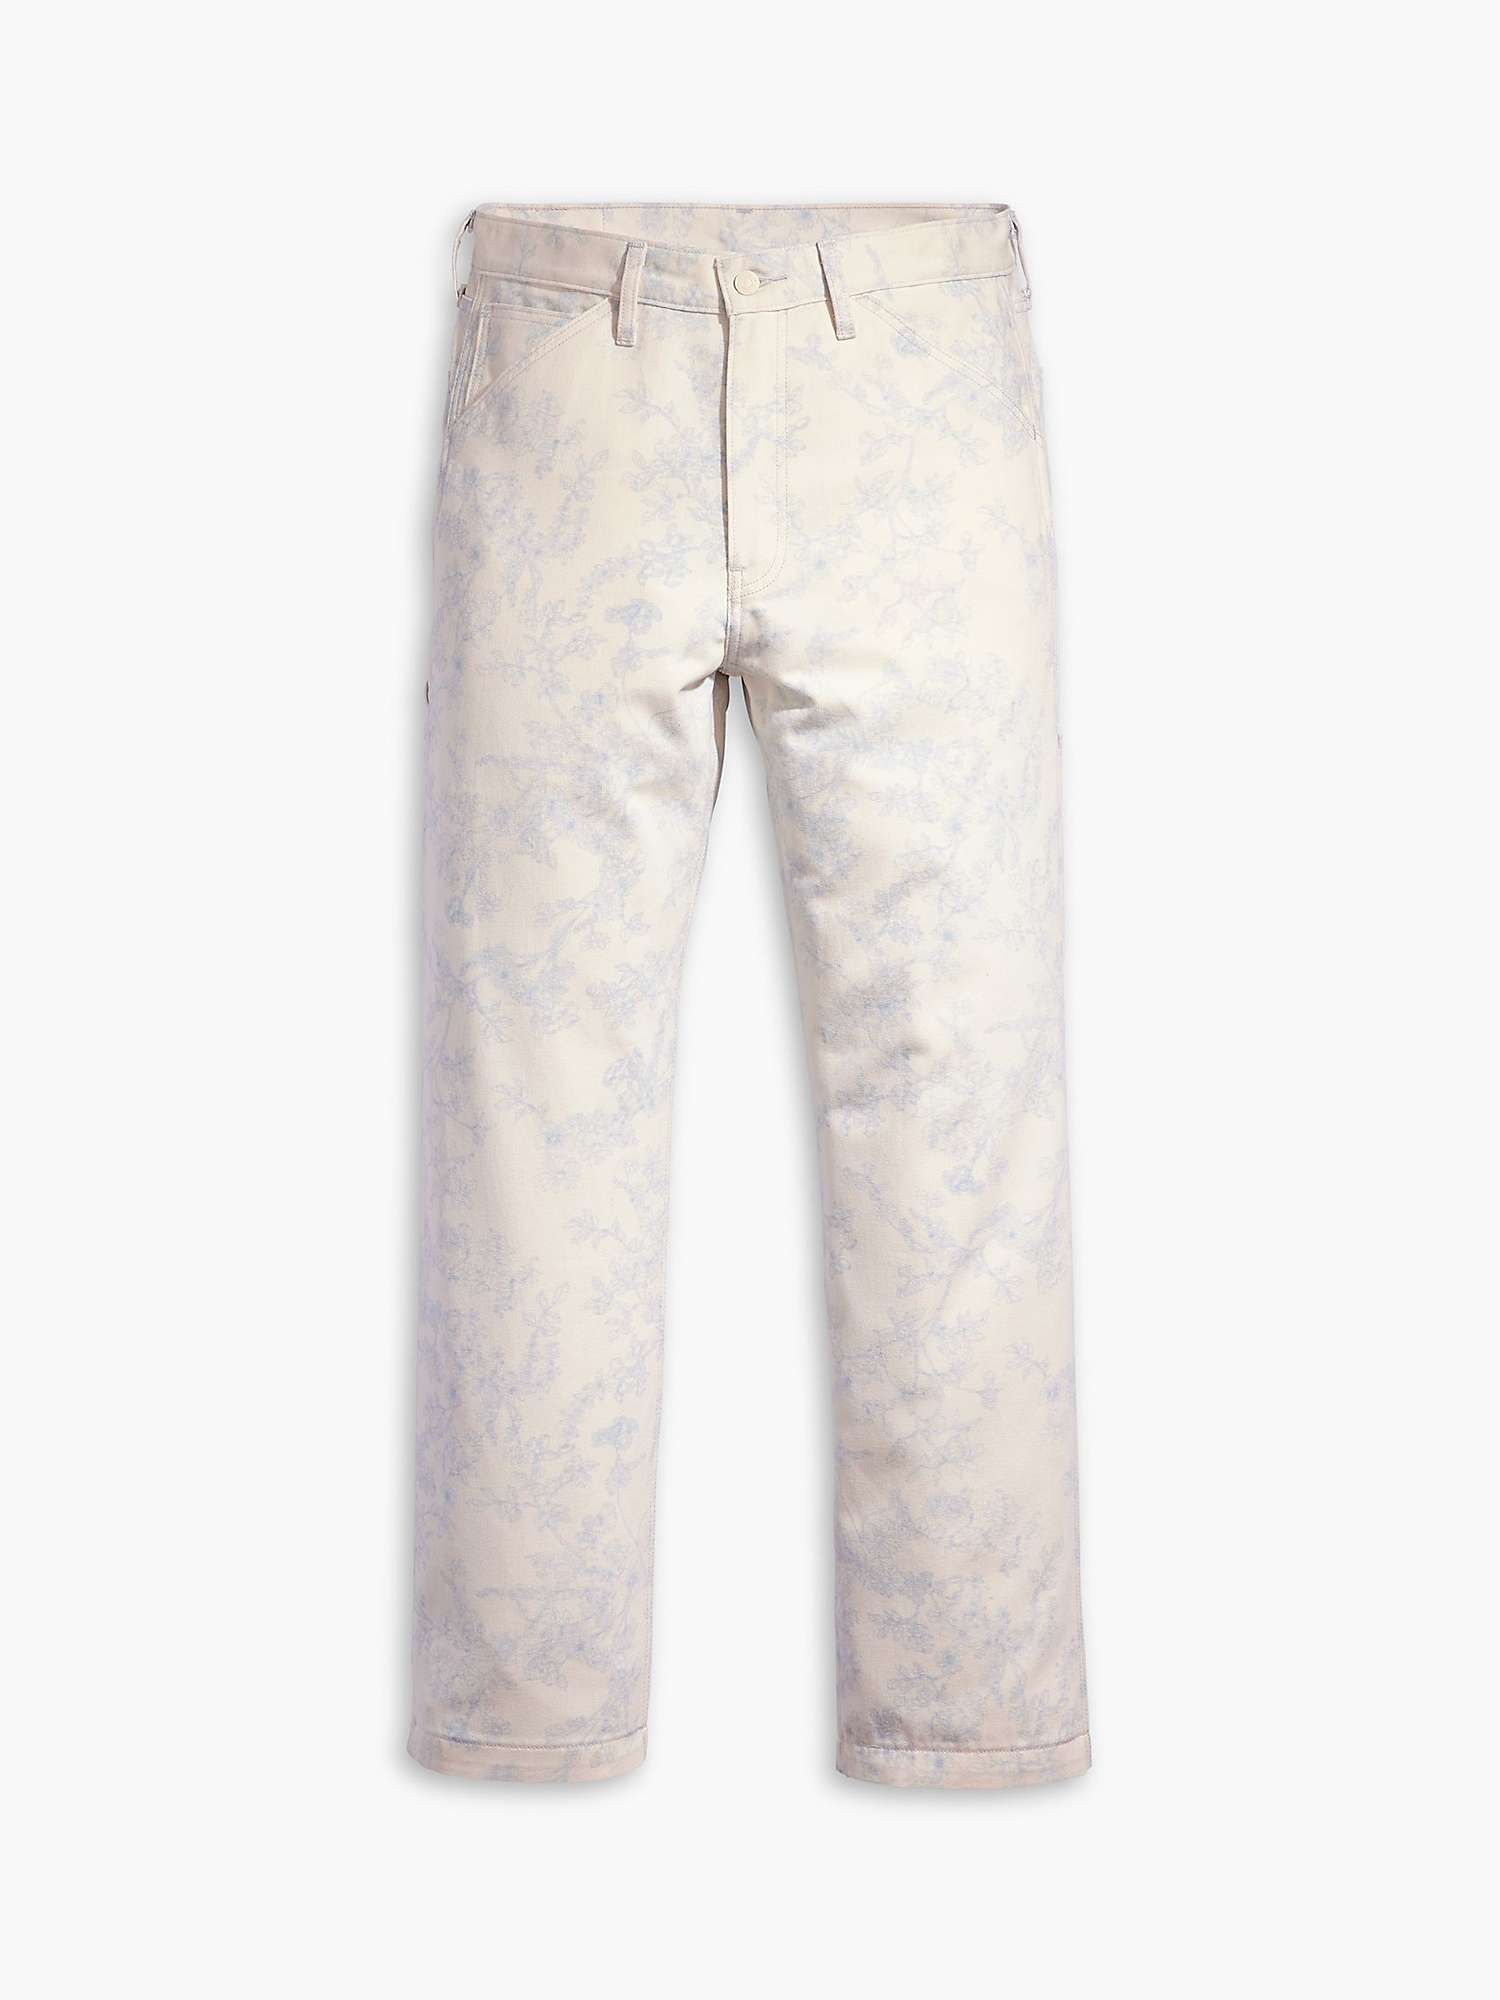 Buy Levi's Stay Loose Carpenter Jeans, Abstract Indigo Ink Online at johnlewis.com